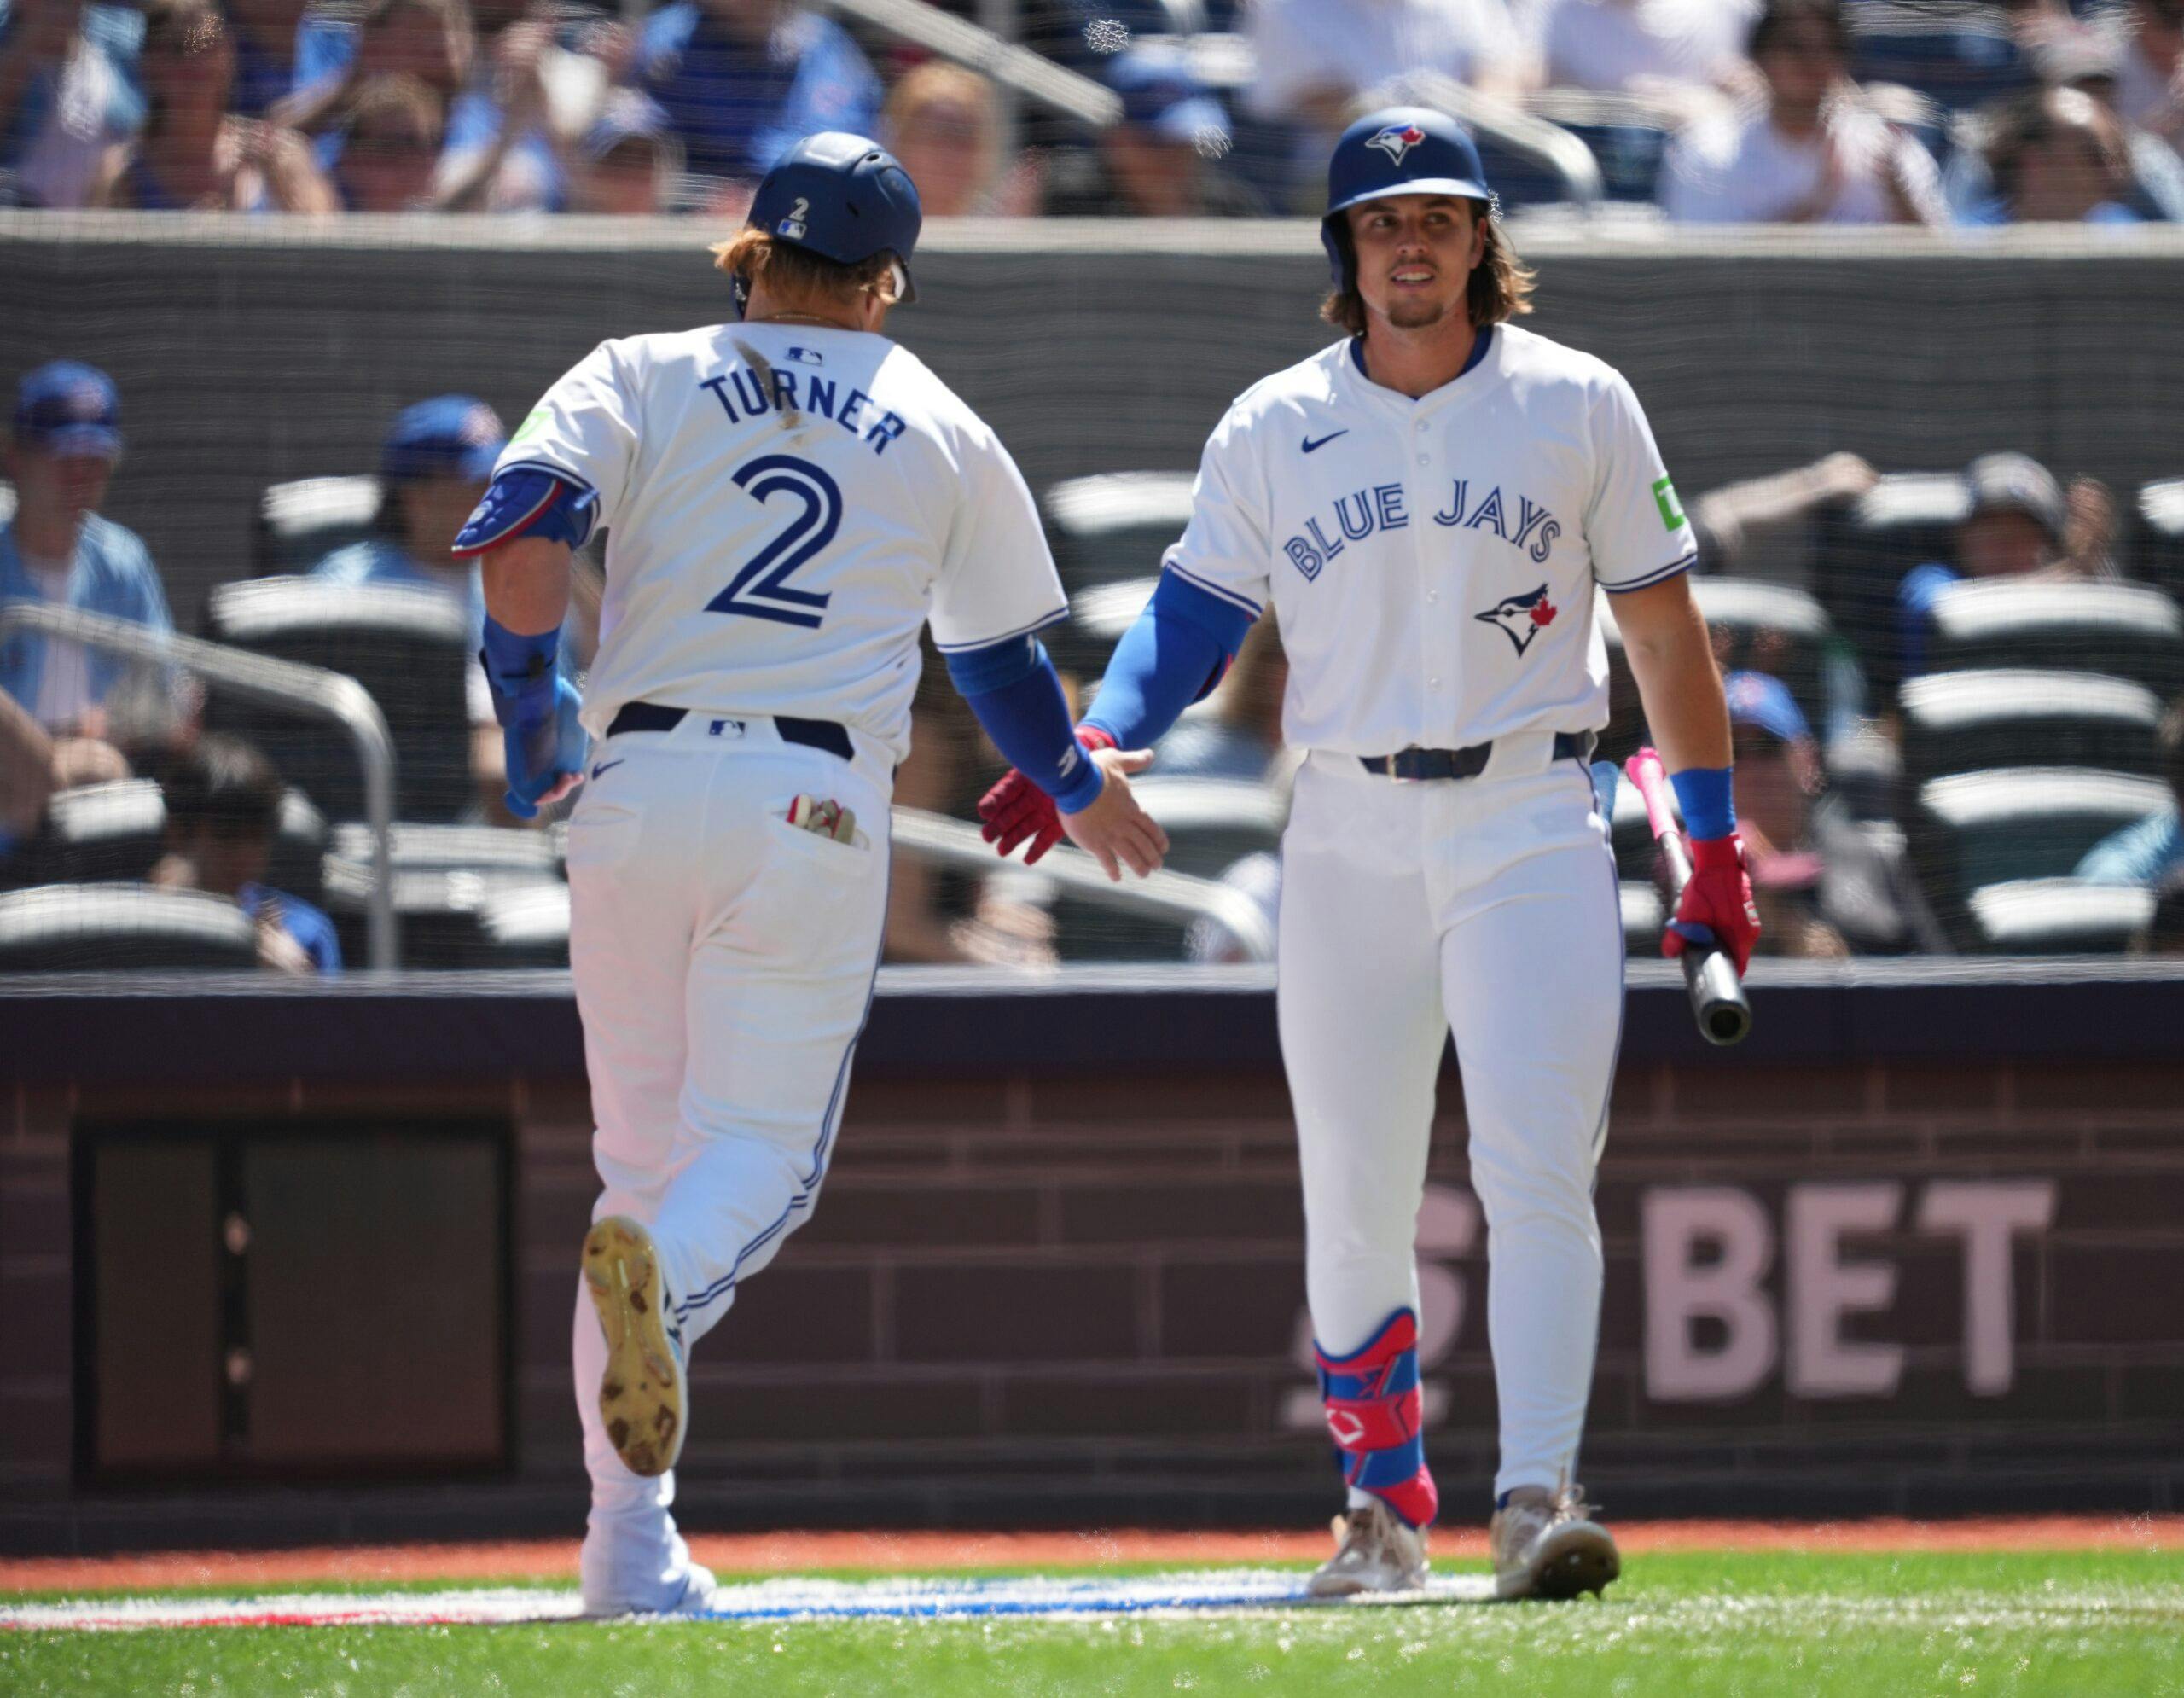 Toronto Blue Jays designated hitter Justin Turner (2) scores a run and celebrates with Toronto Blue Jays third baseman Addison Barger (47) against the Cleveland Guardians during the second inning at Rogers Centre.